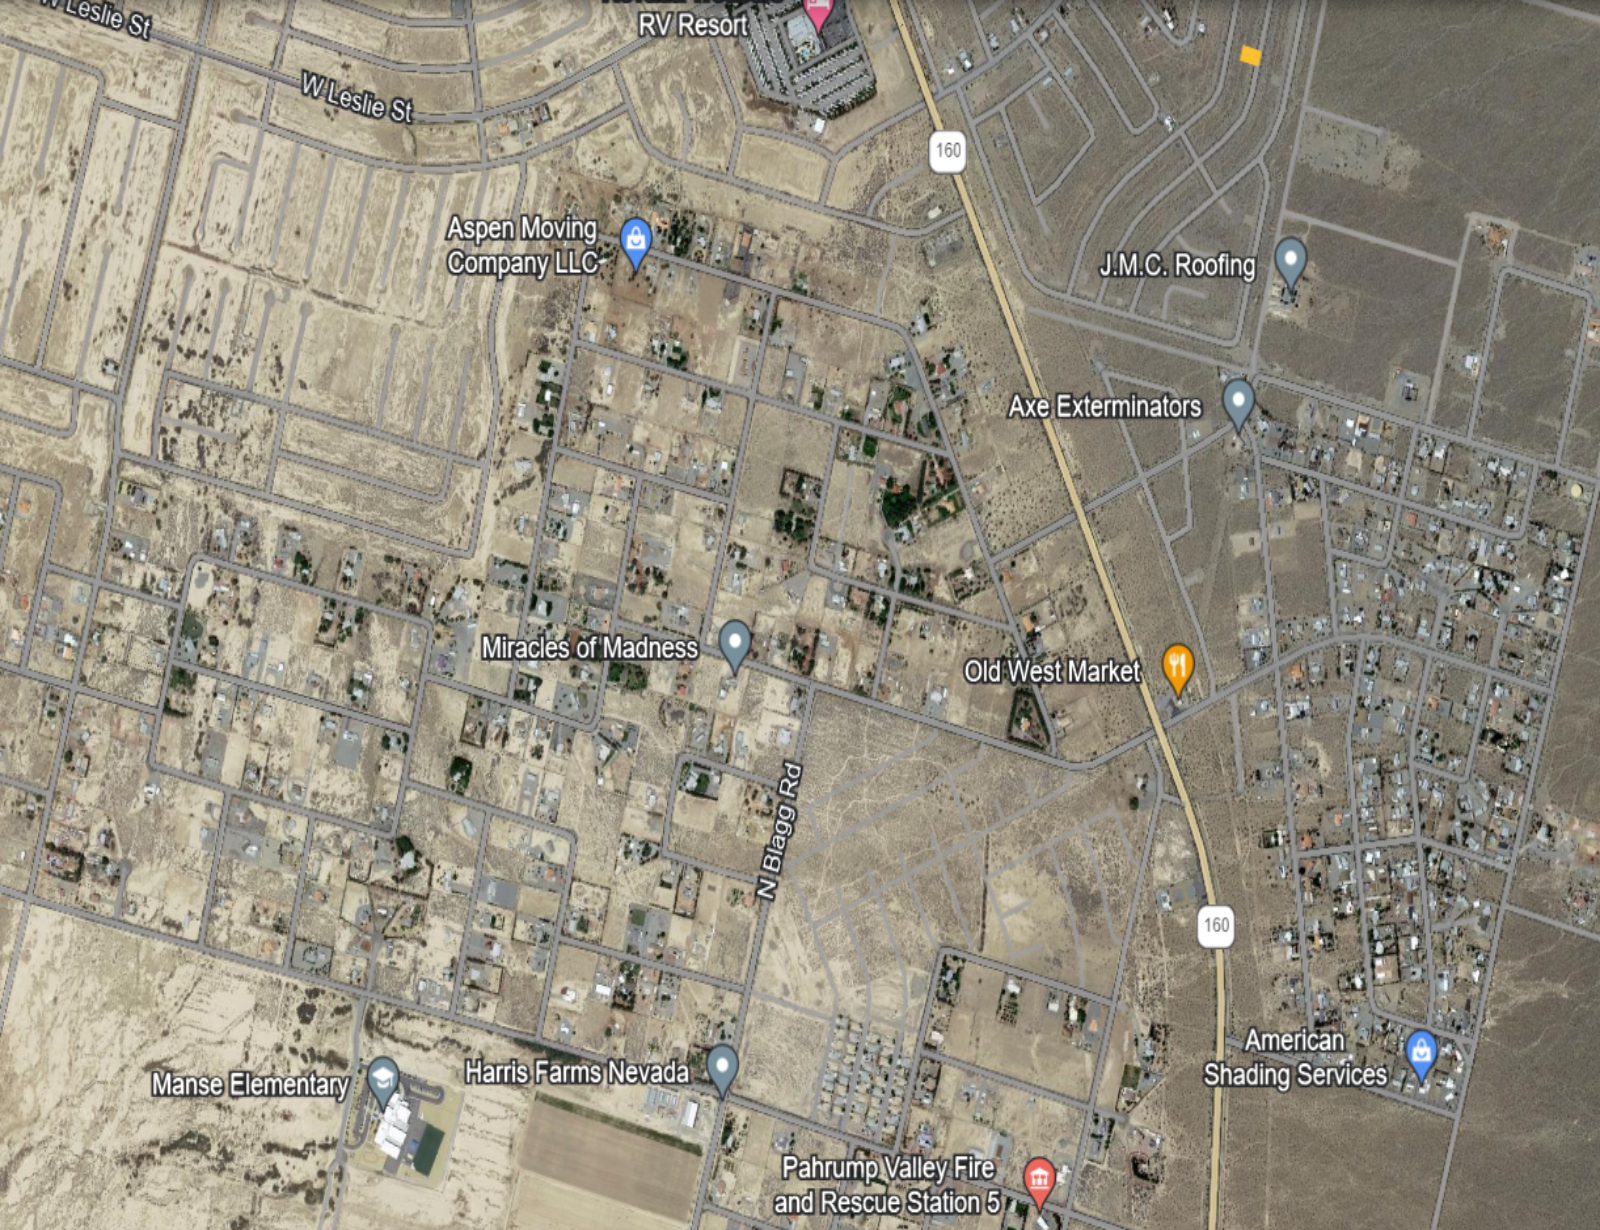 *NEW* NYE COUNTY, NEVADA RESIDENTIAL LOT NEAR HWY 160!! LOW MONTHLY PAYMENTS OF $135.00 6370 Jungle Ave., Pahrump, NV 89041 APN: 030-303-01 - Get Land Today